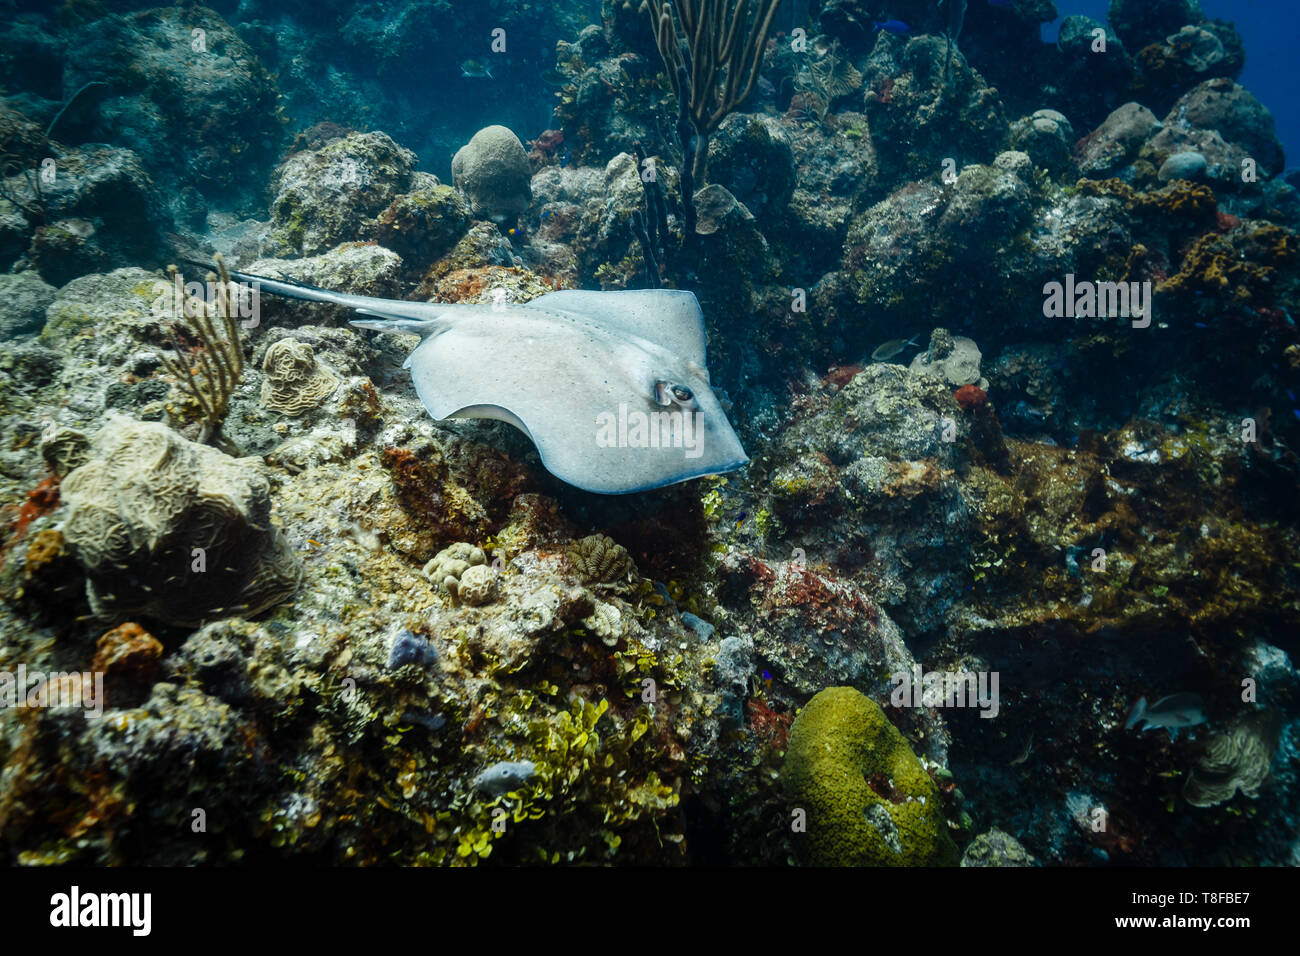 Southern Stingray, Dasyatis americana, glides over coral reef in mexico Stock Photo